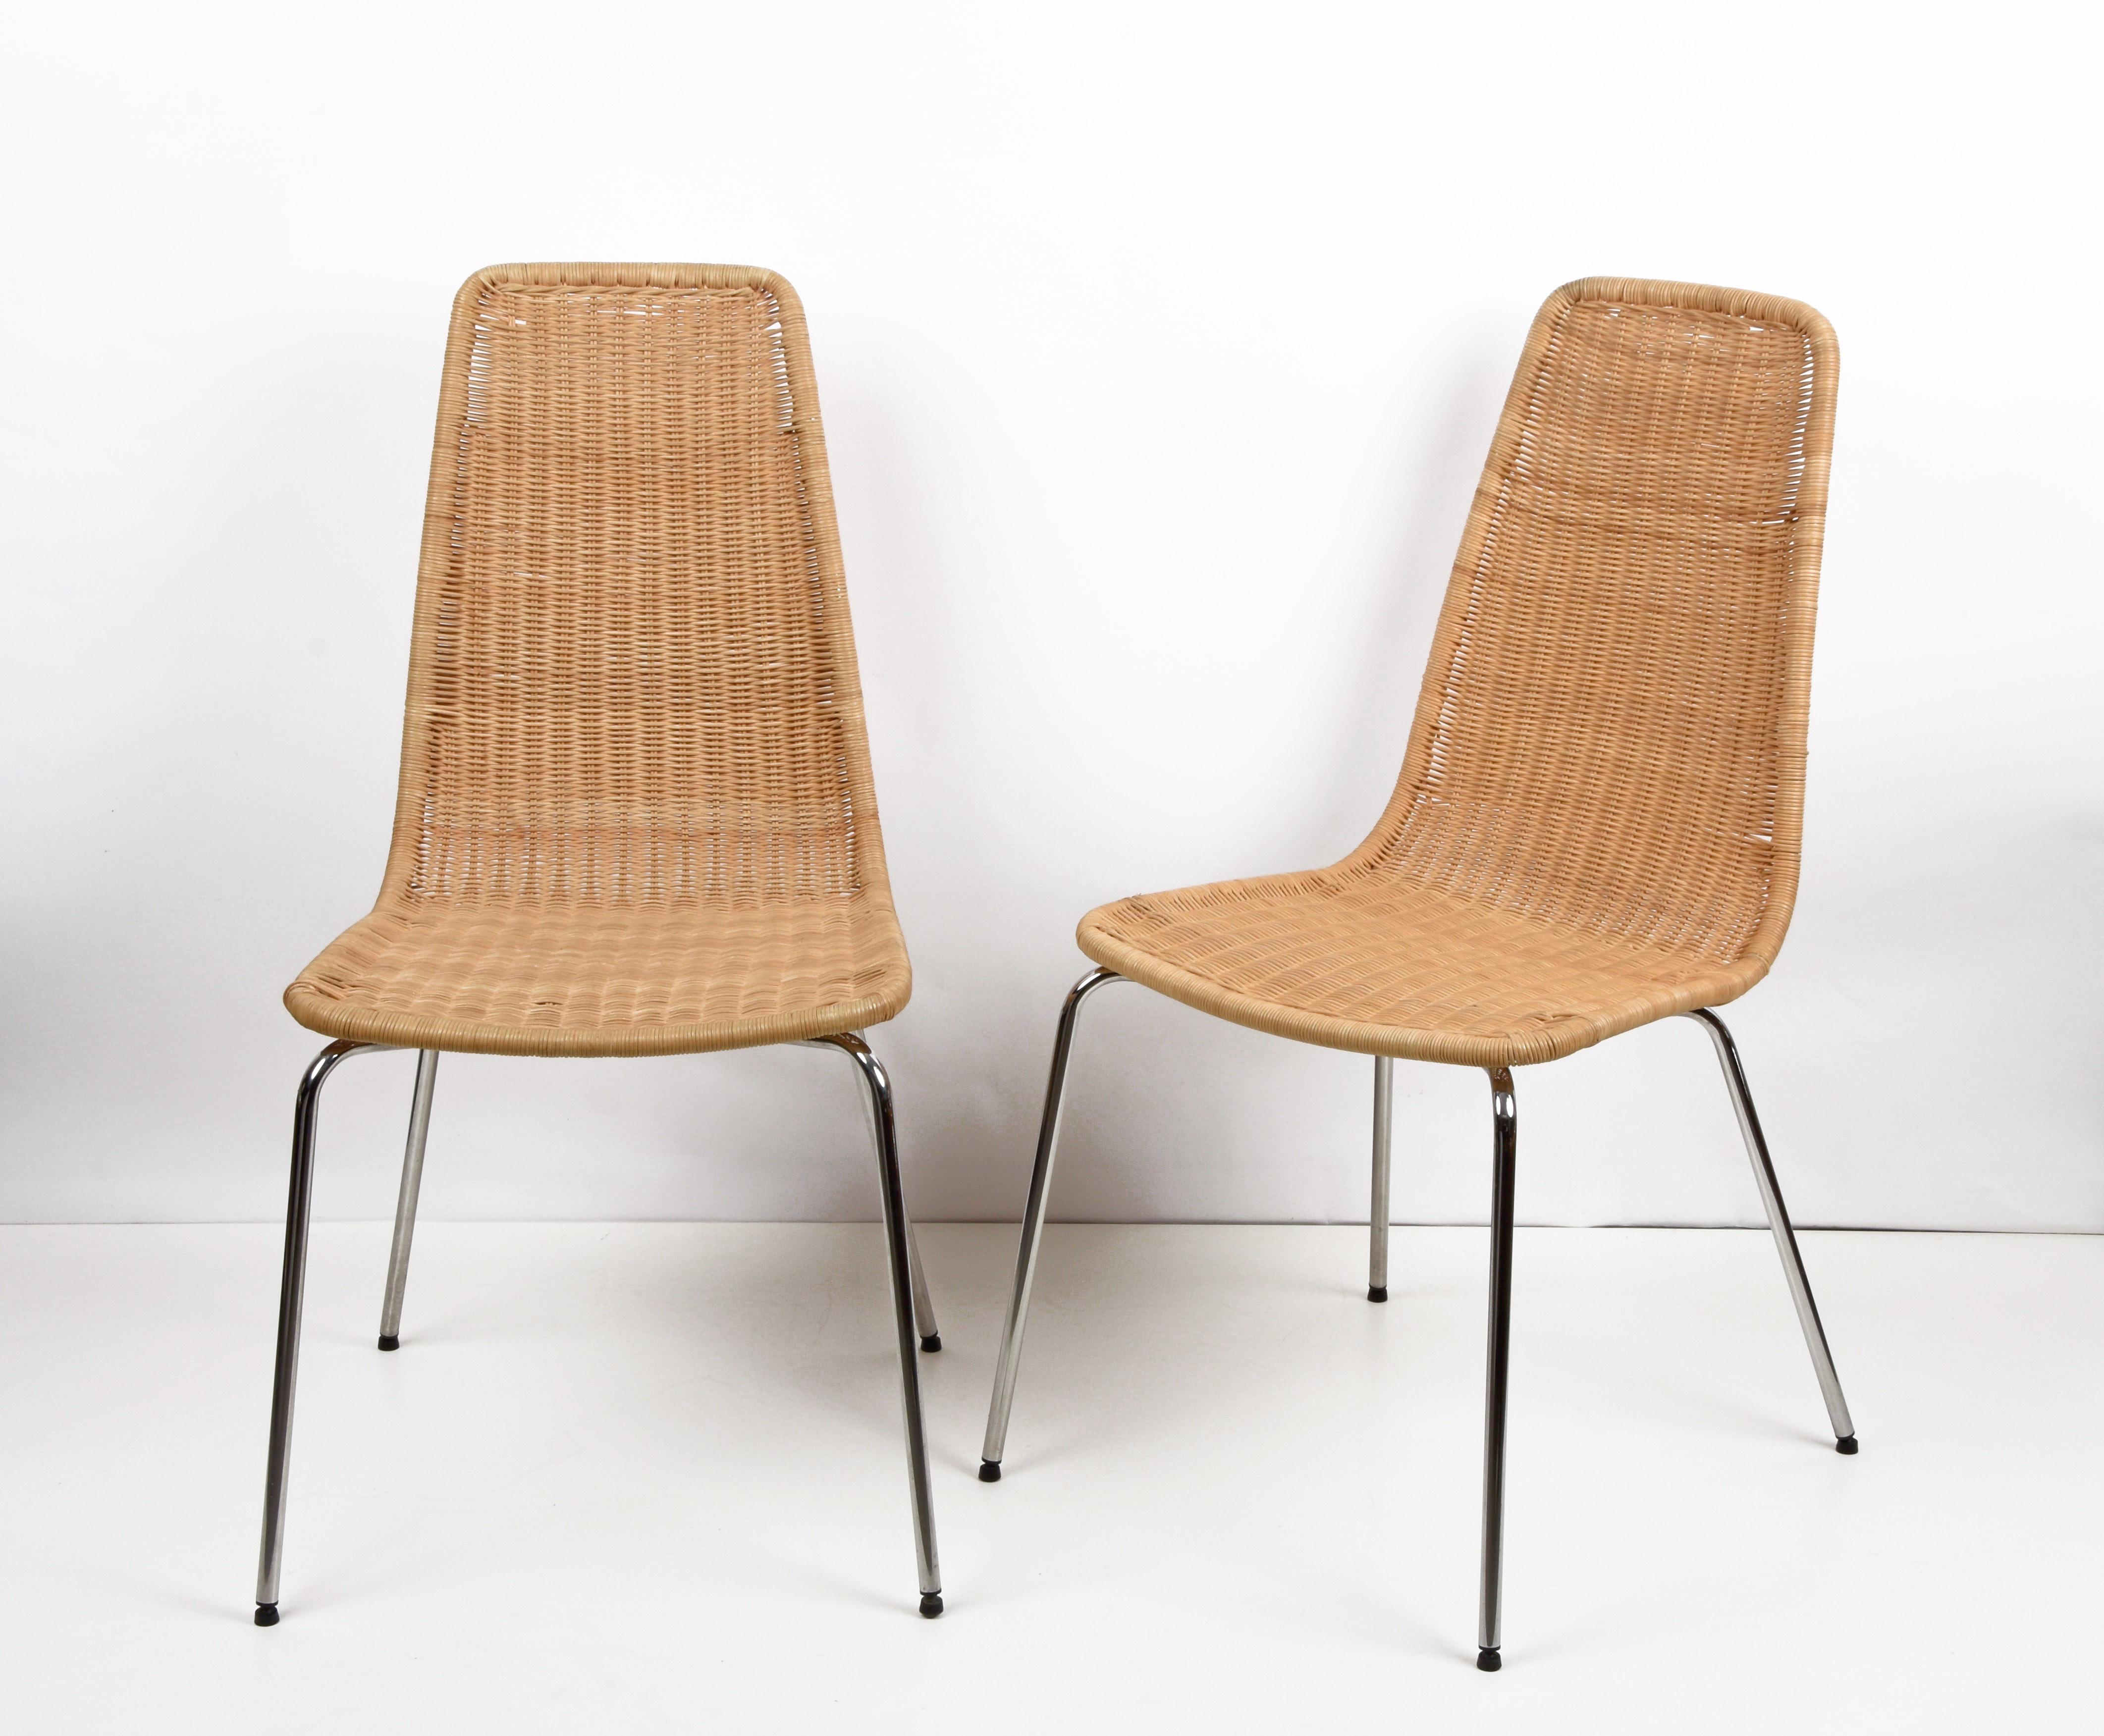 Midcentury Chromed Metal with Removable Rattan and Wicker Italian Chairs, 1970s For Sale 2